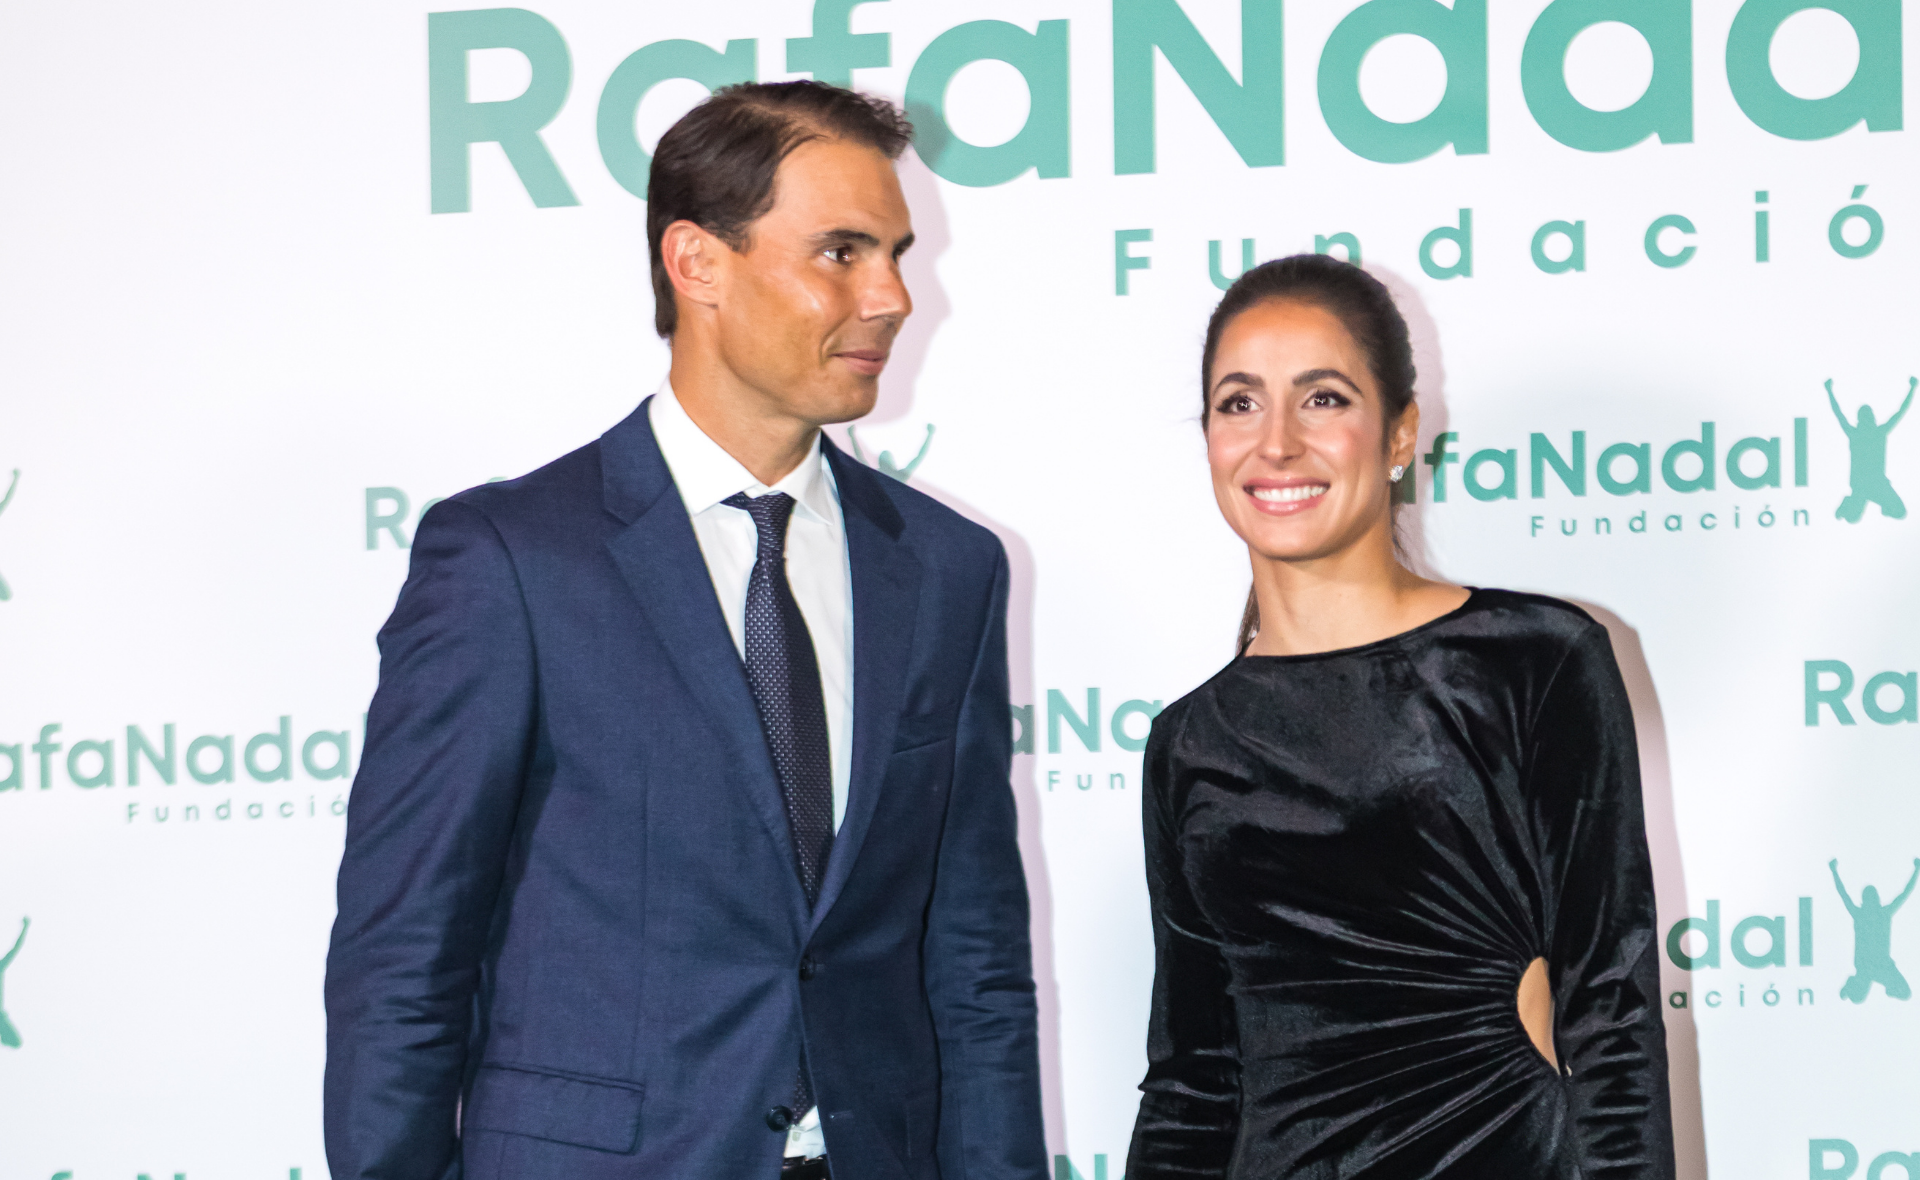 Childhood sweethearts with a baby boy: Meet Rafael Nadal’s wife Maria Francisca Perello